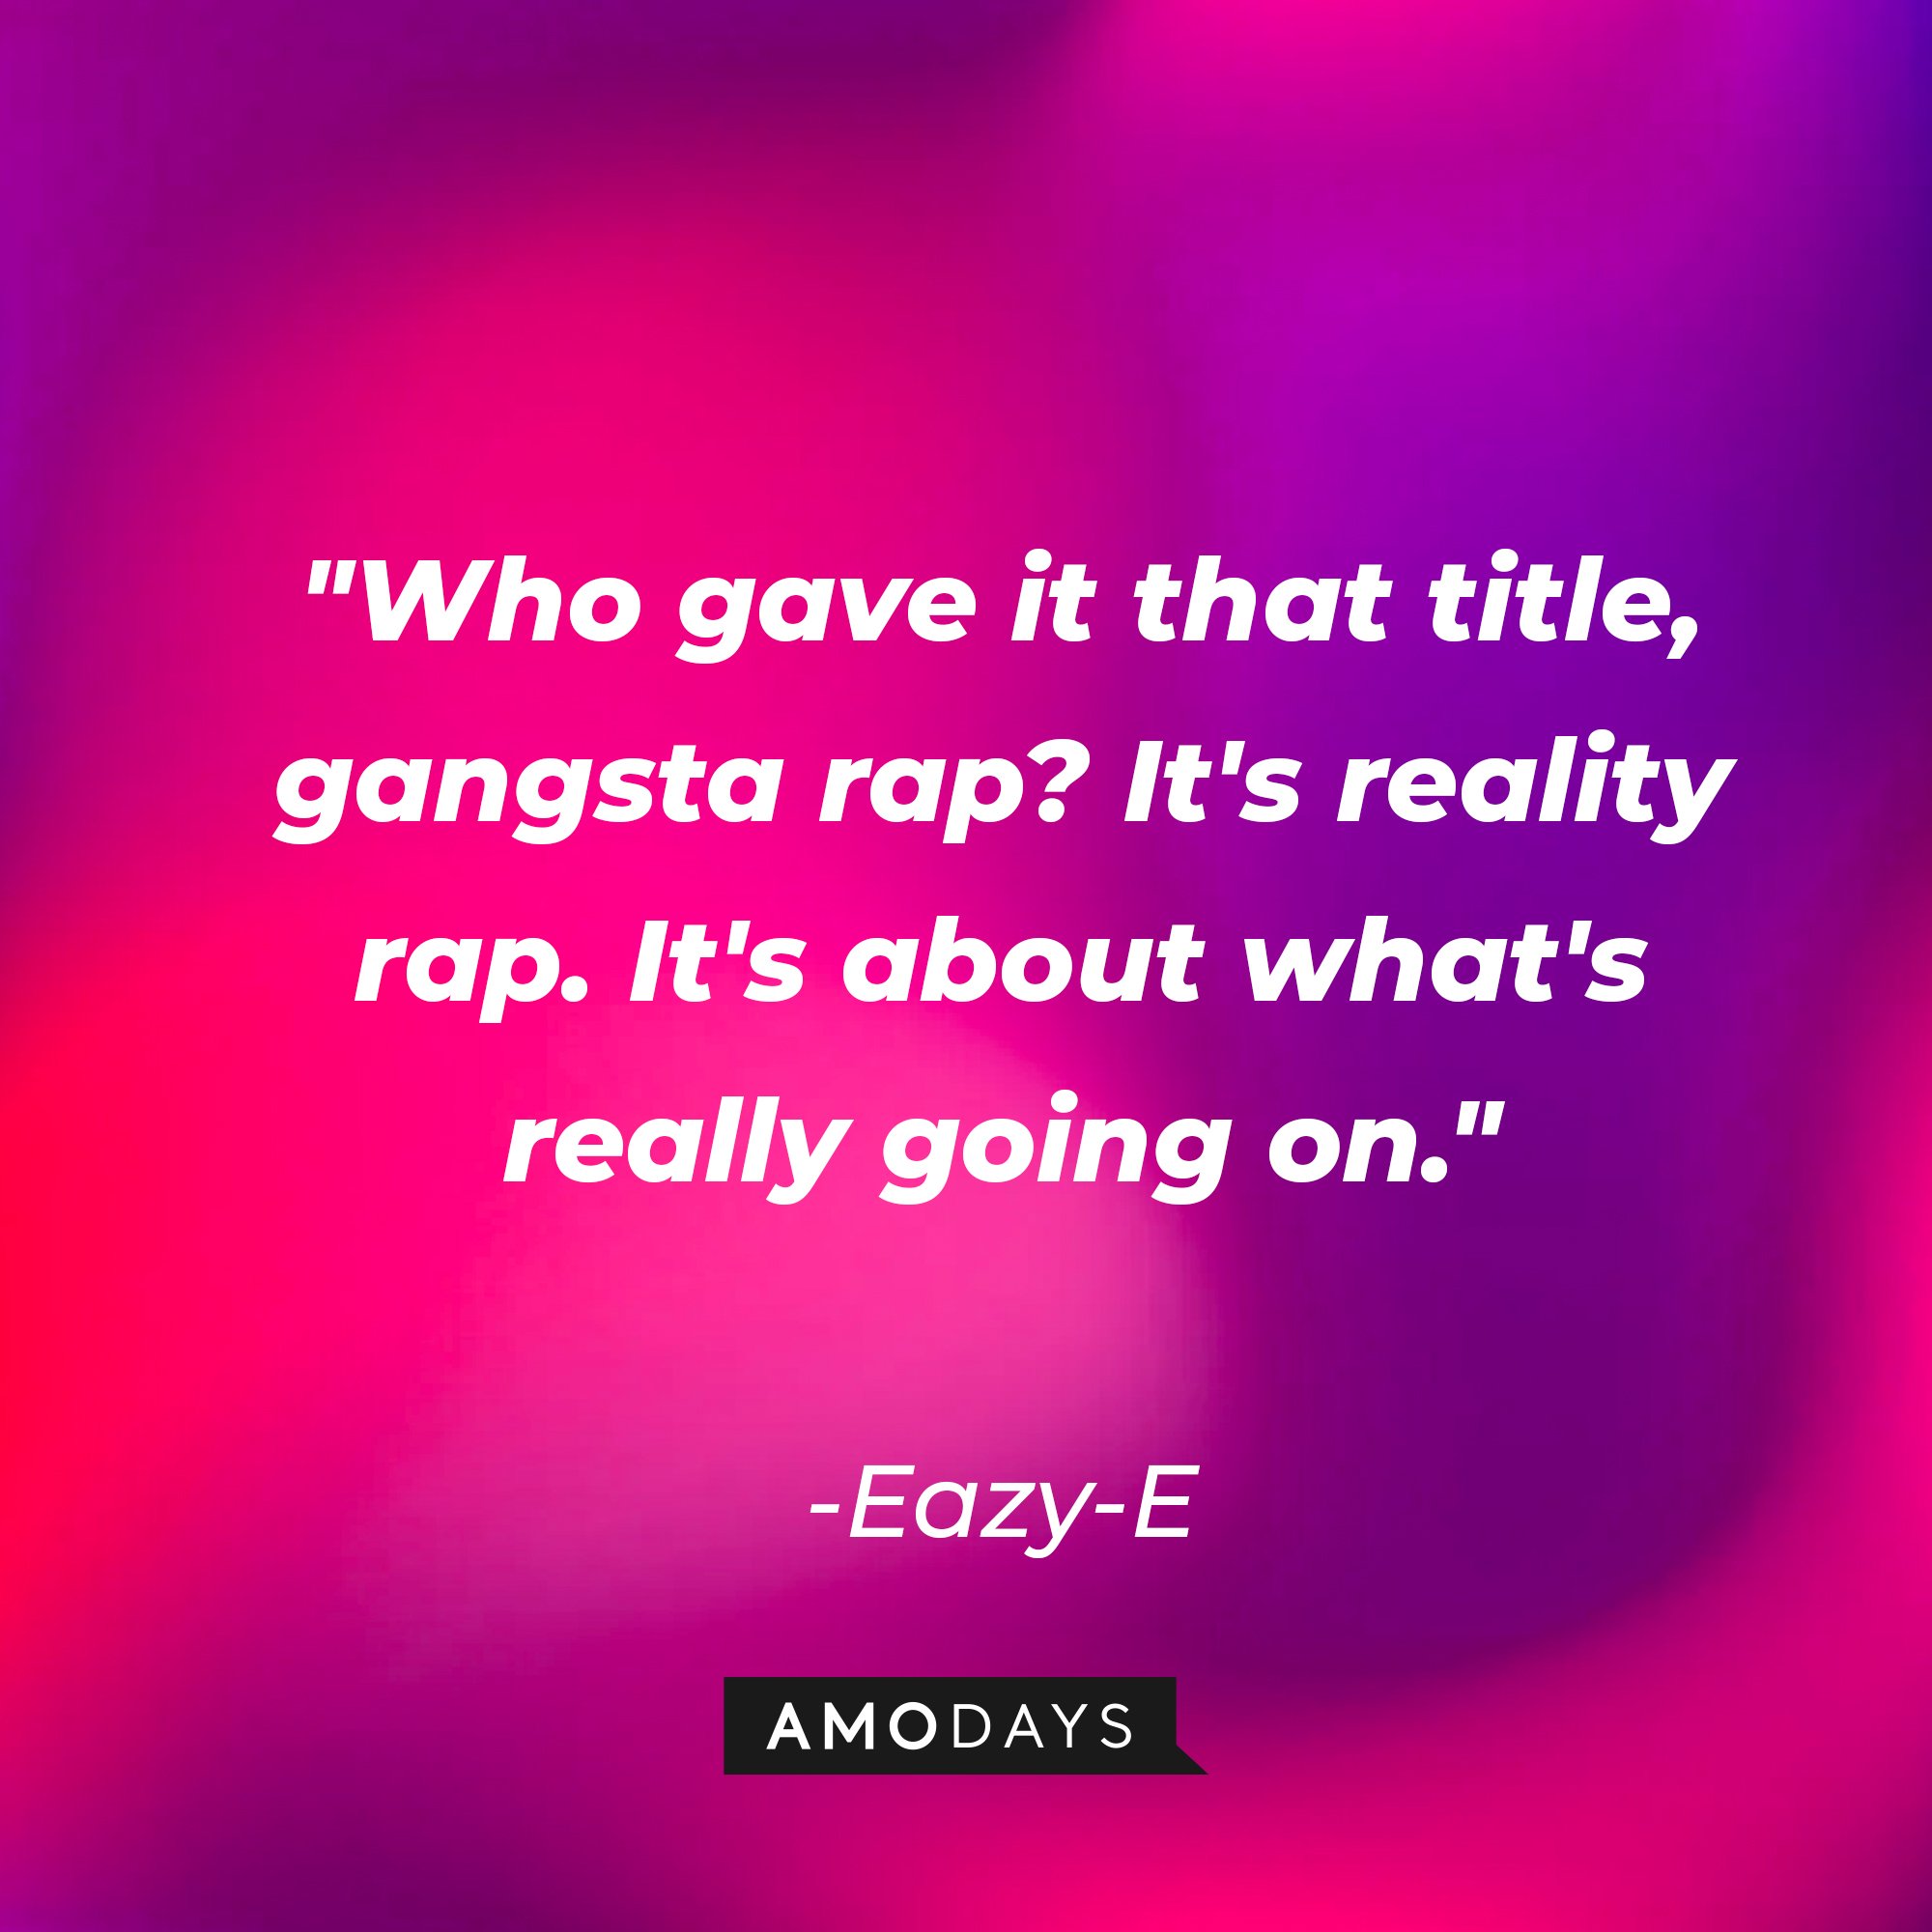 Eazy-E's quote: "Who gave it that title, gangsta rap? It's reality rap. It's about what's really going on." | Image: AmoDays